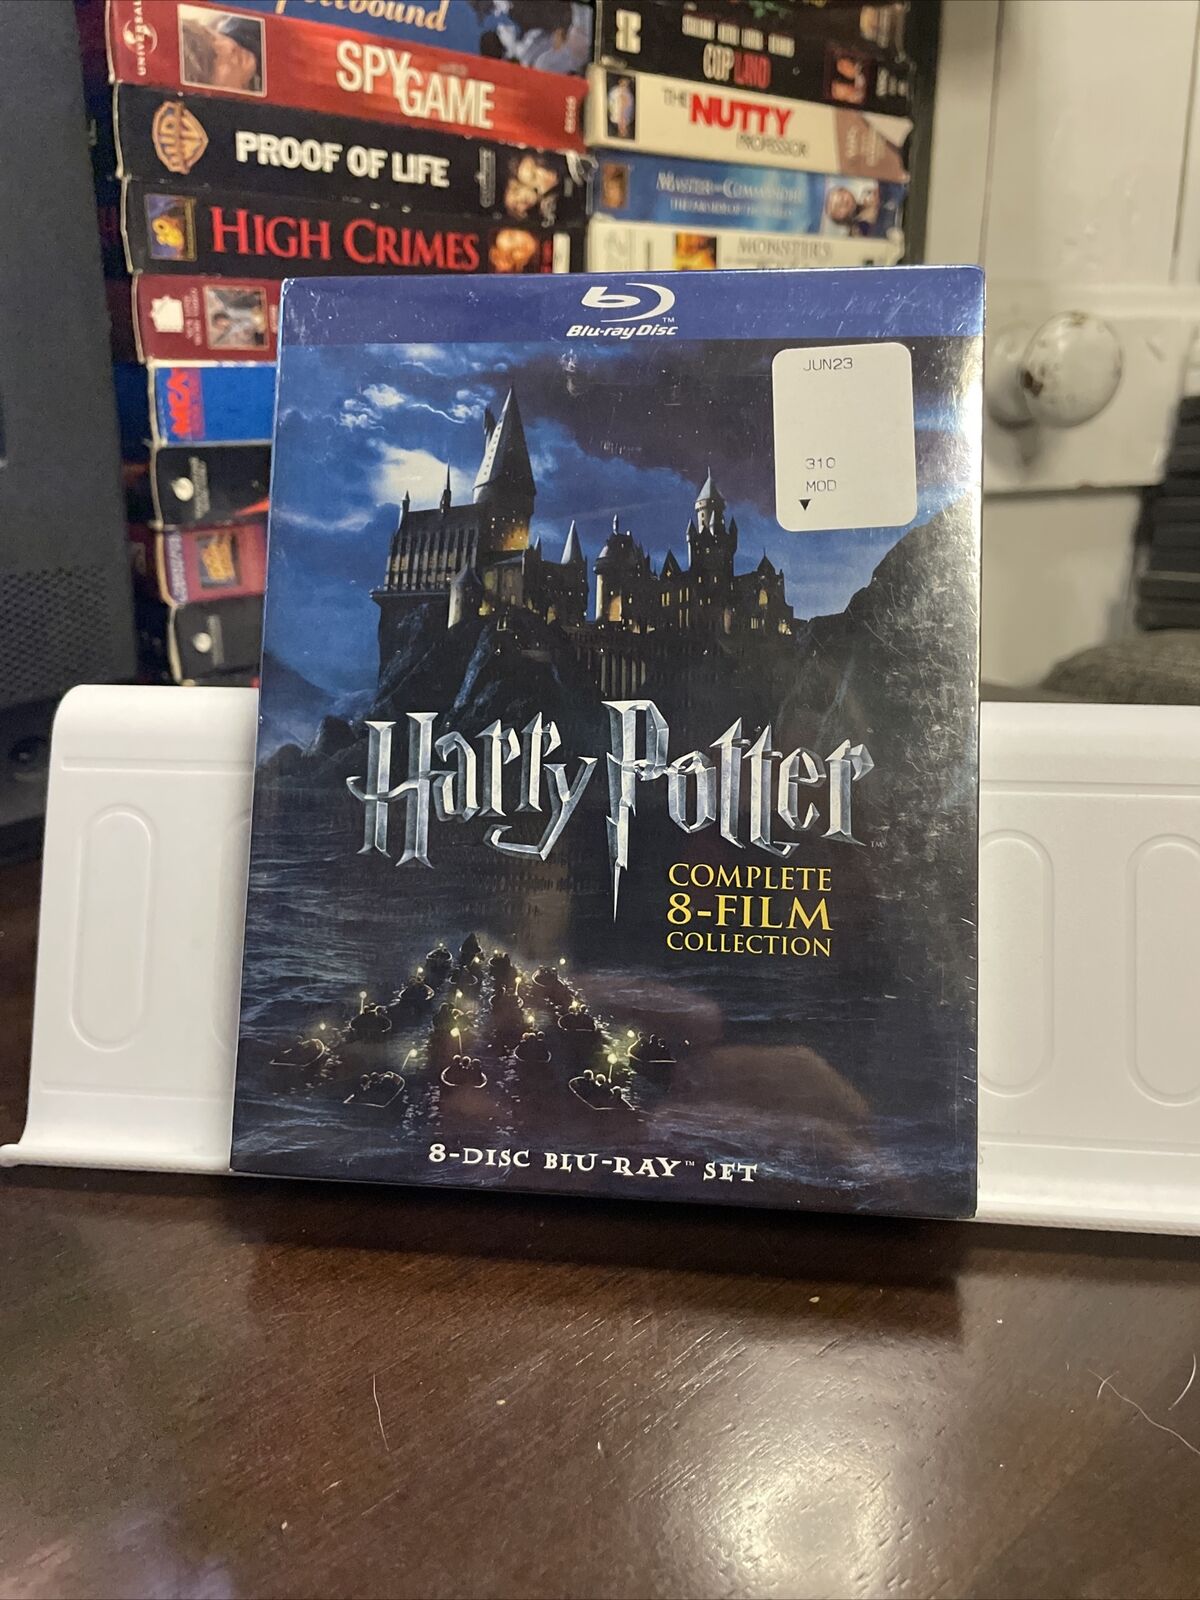 Harry Potter: Complete 8-Film Collection (Blu-ray) Sealed Brand New